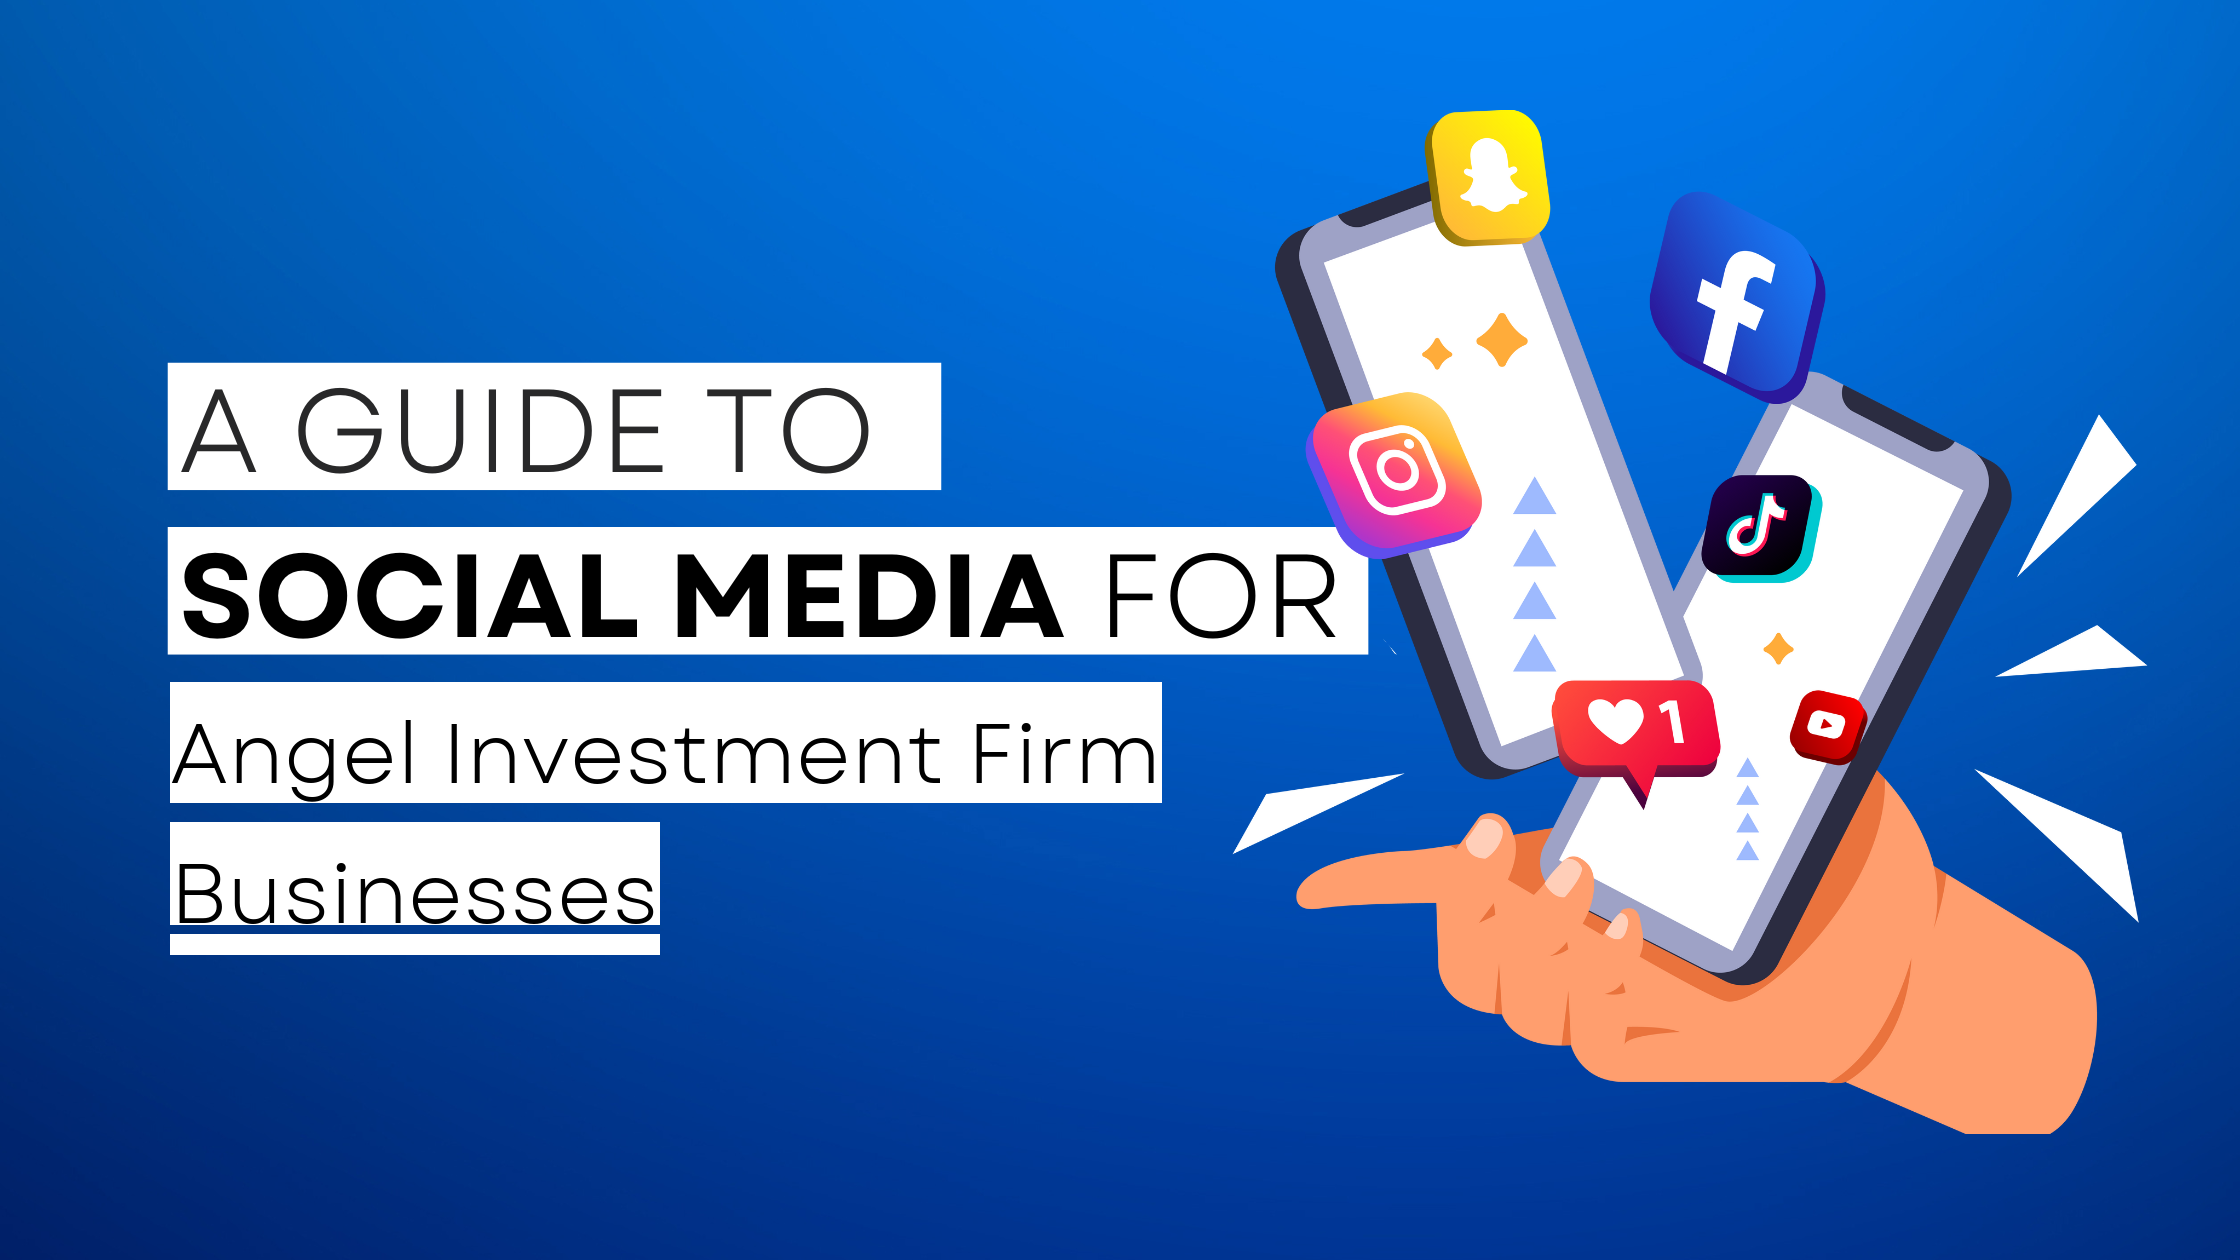 How to start Angel Investment Firm  on social media